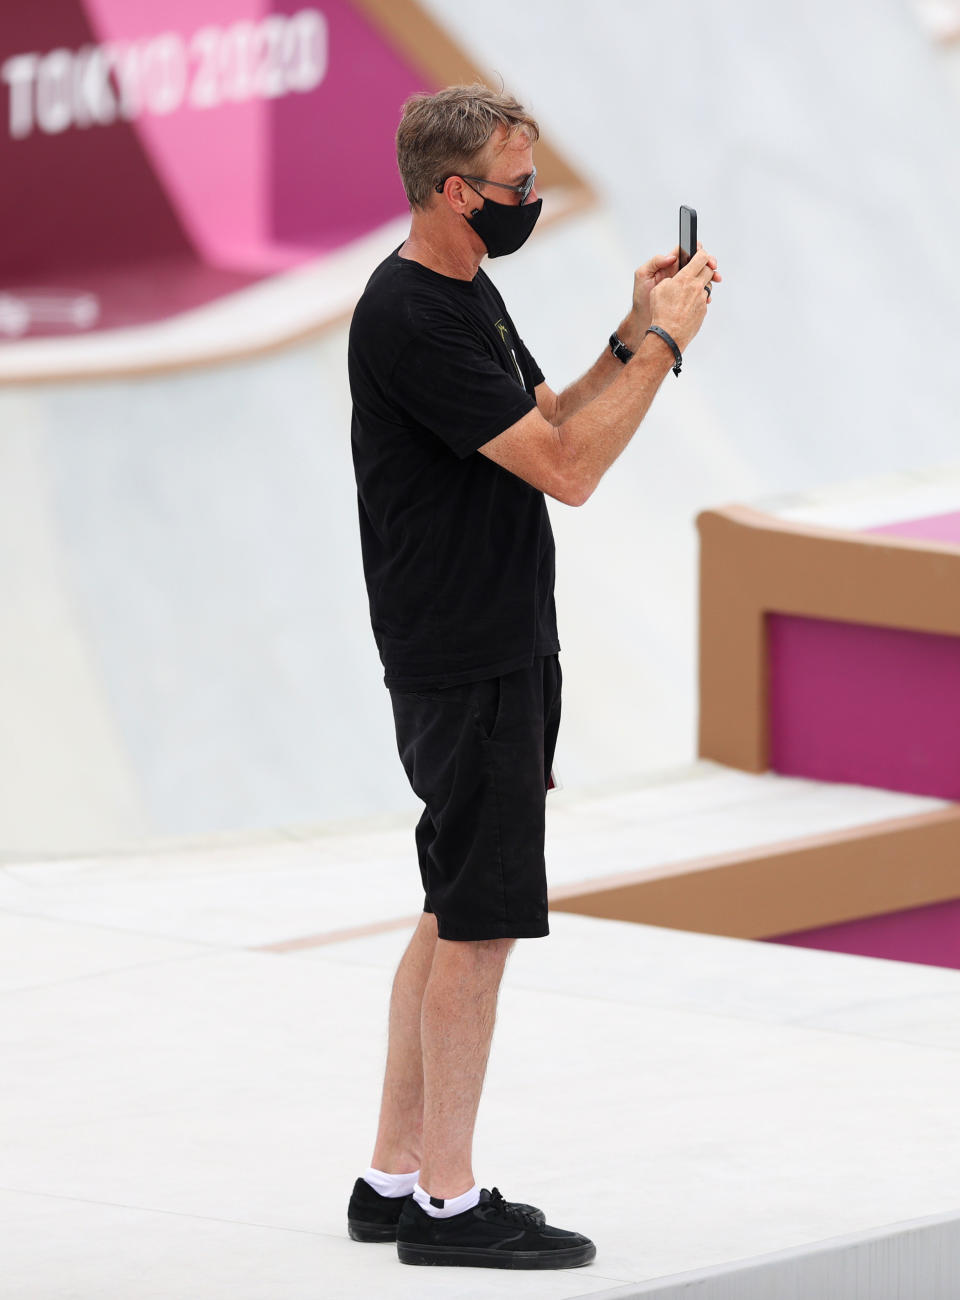 Tony at the 2020 Tokyo Olympics at the skateboard competition taking photos with his phone